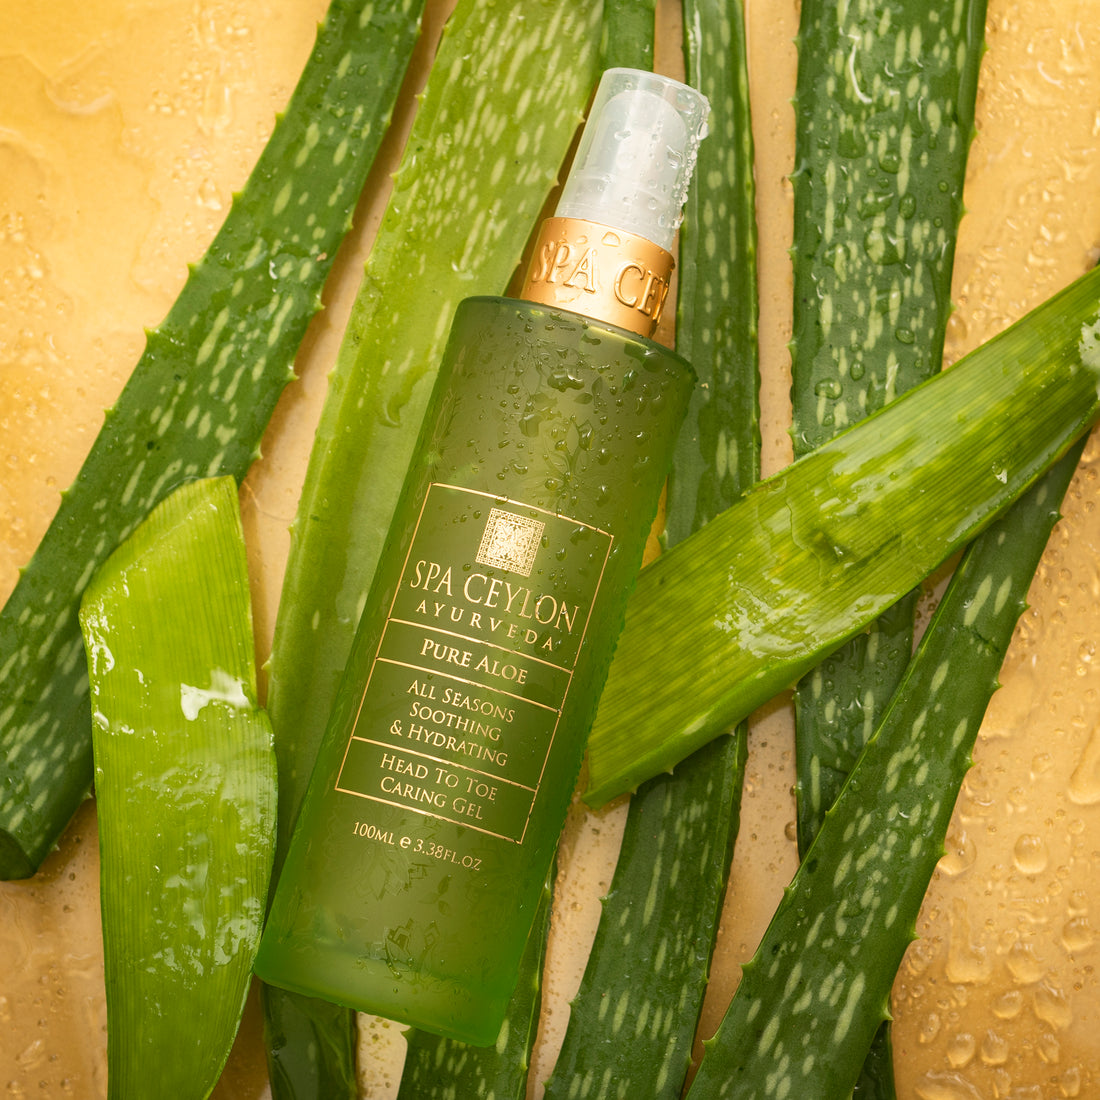 Pure Aloe - All Seasons - Soothing &amp; Hydrating Head To Toe Caring Gel